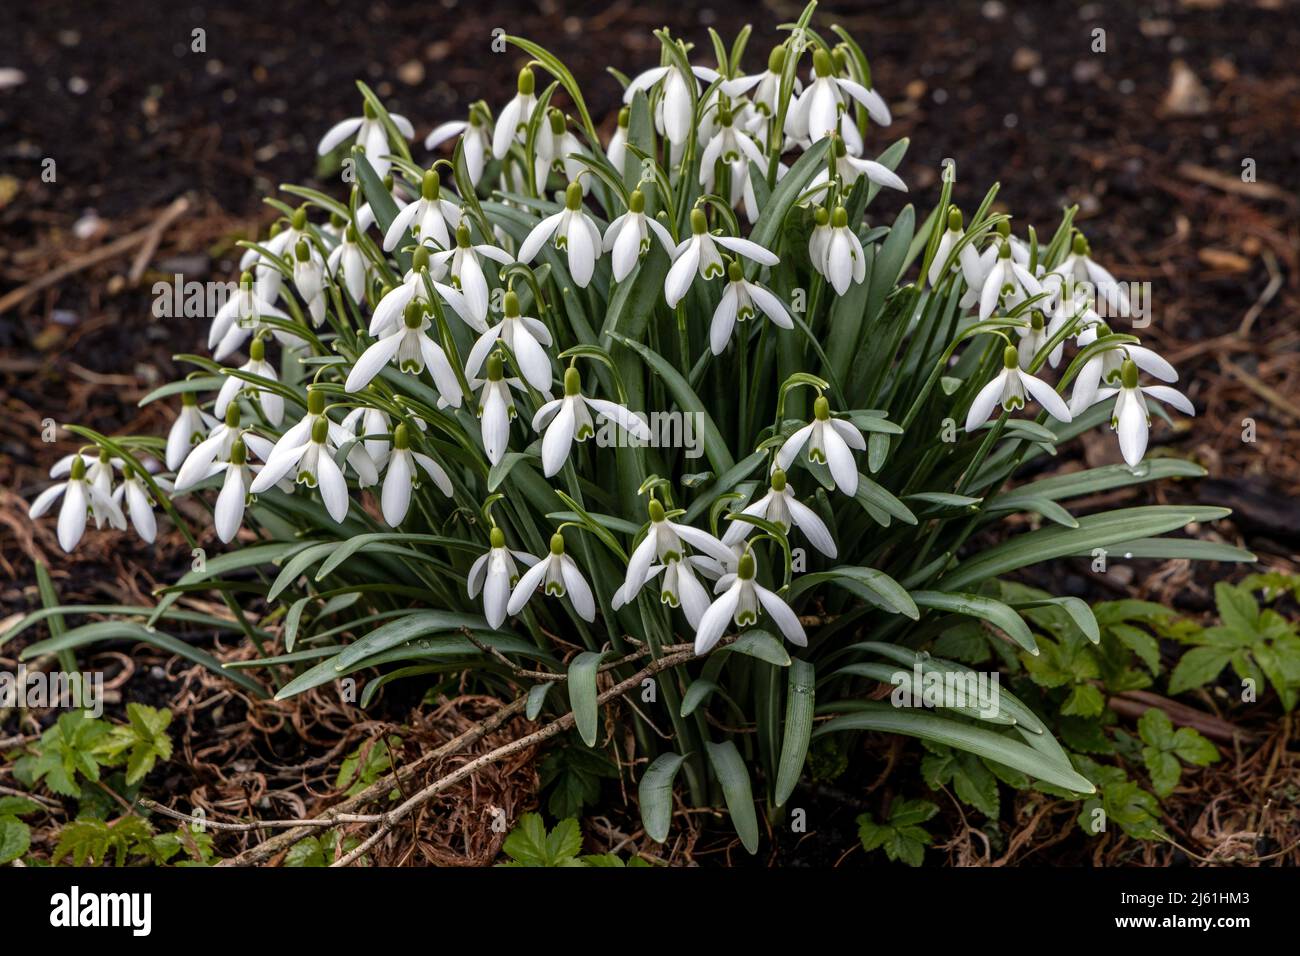 A compacted group of snowdrops in full bloom Stock Photo